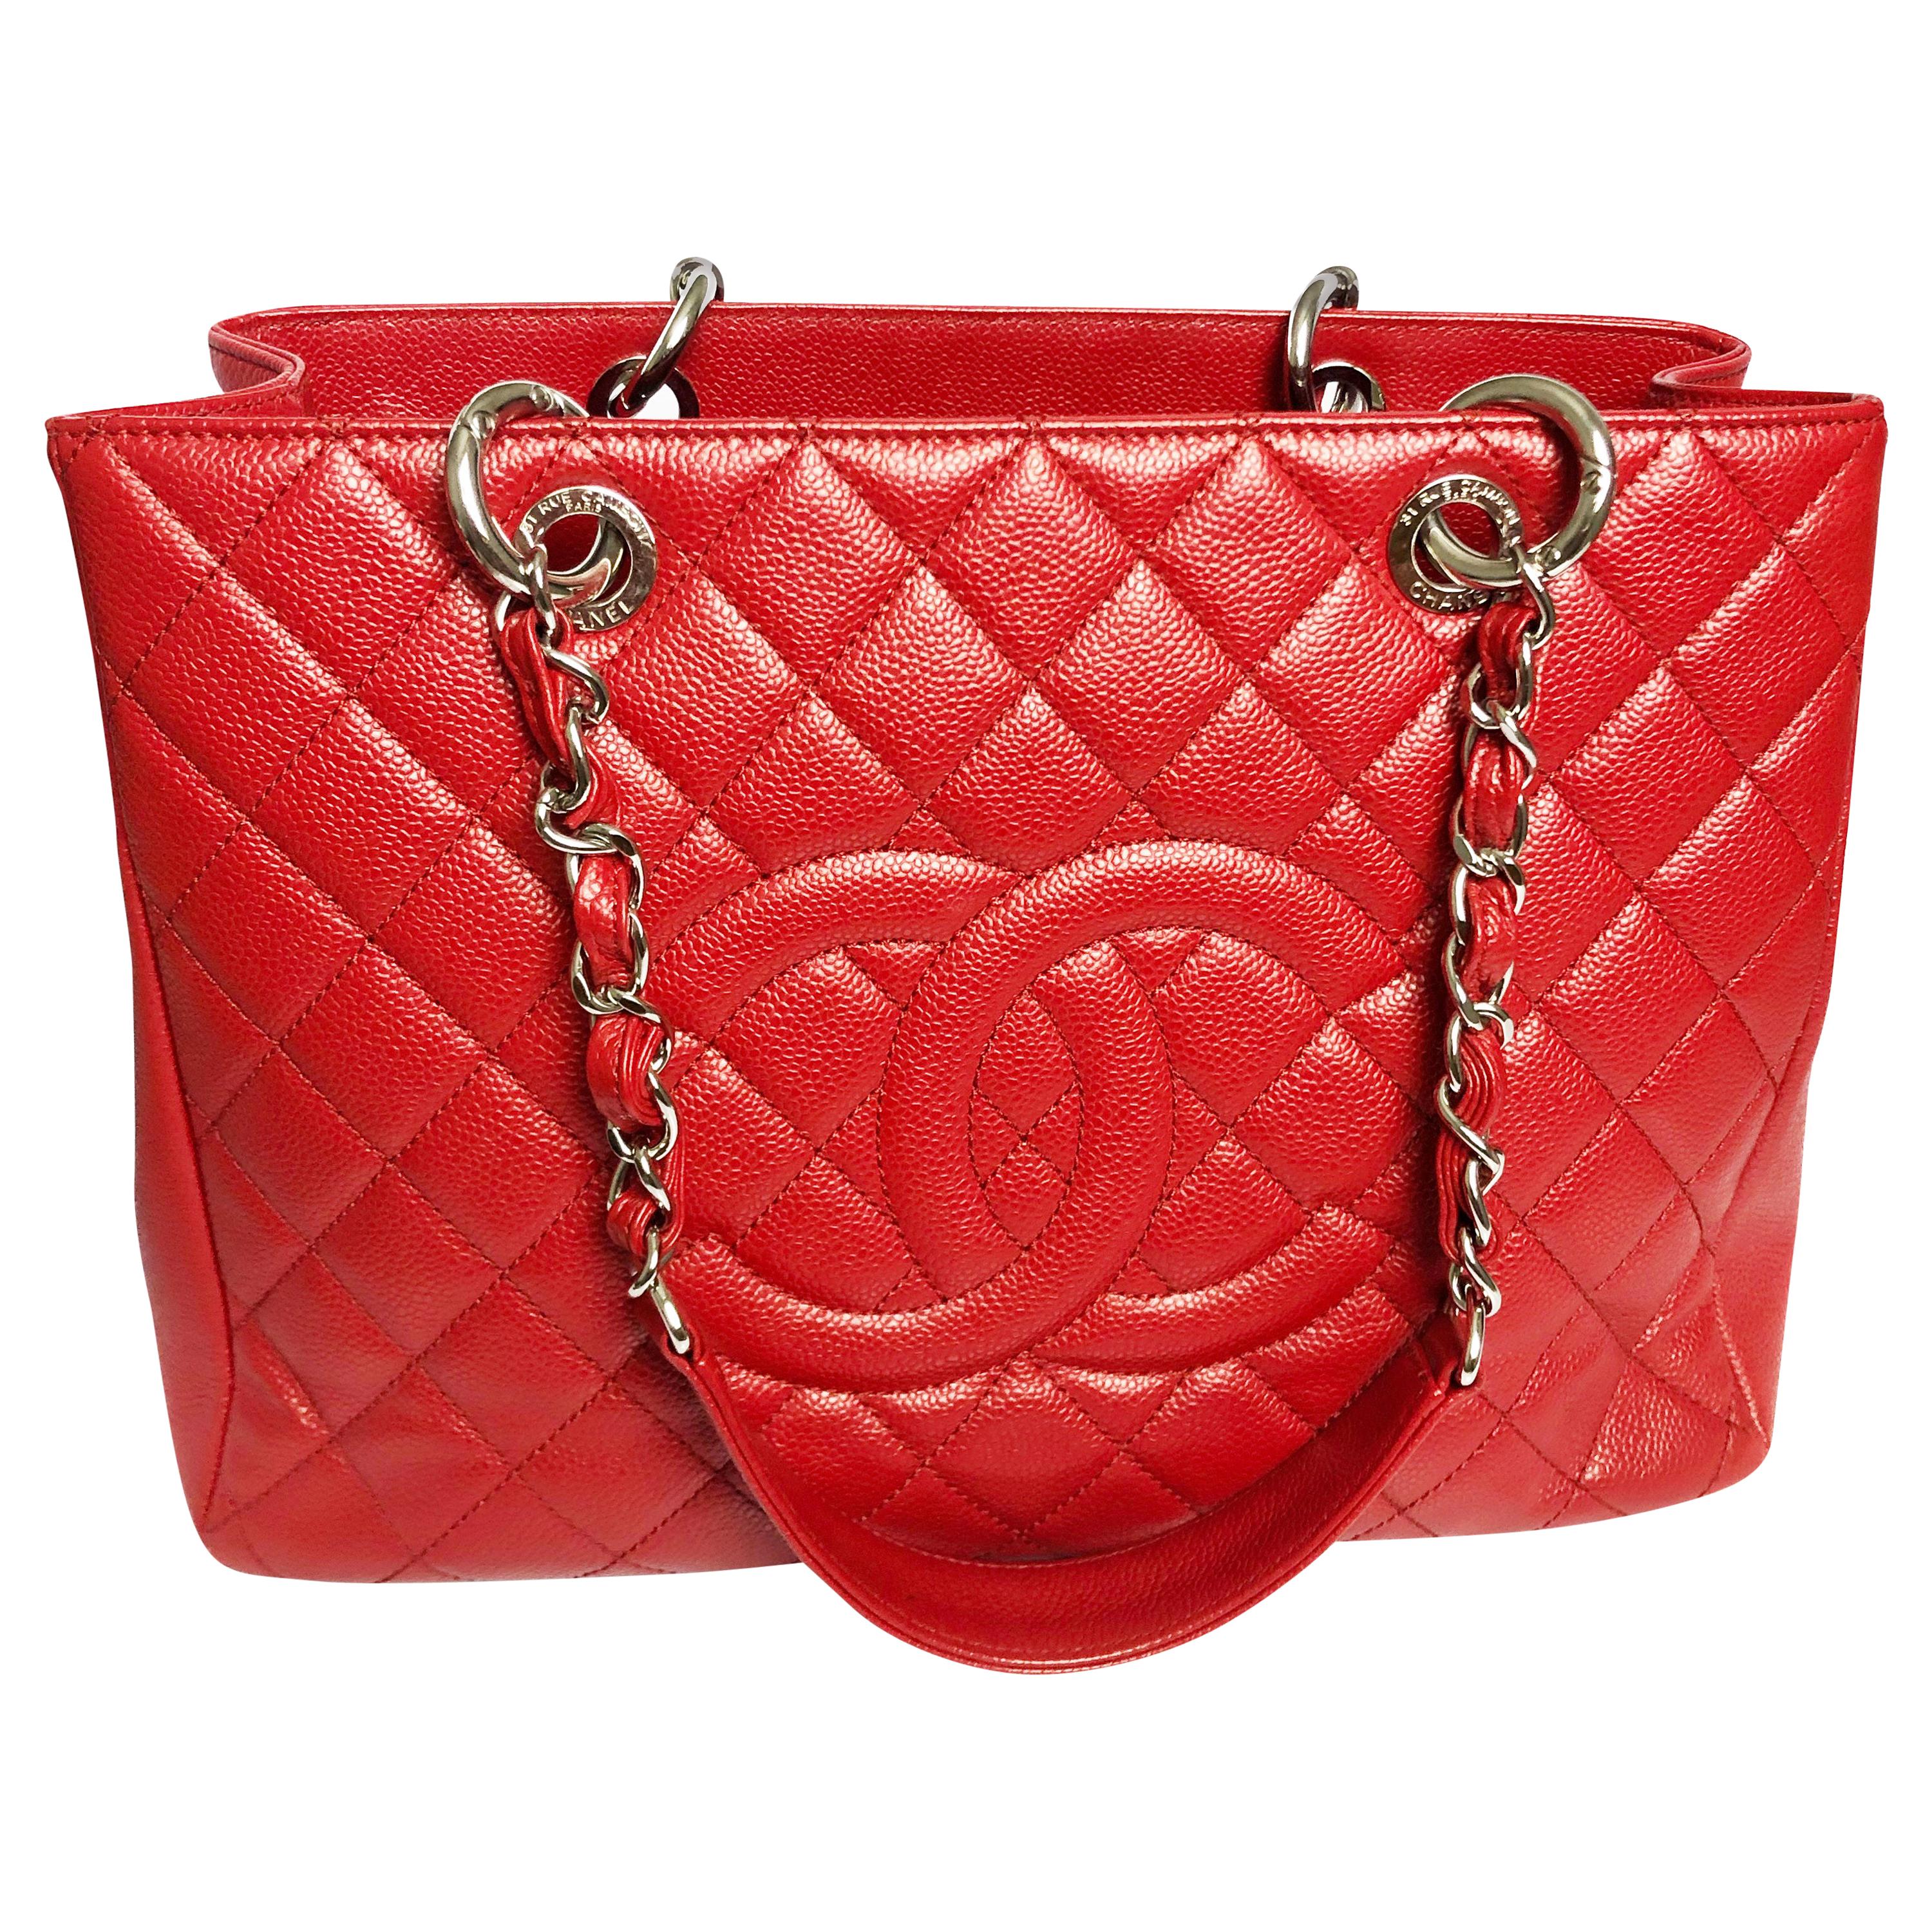 Chanel GST Grand Shopping Tote Red Caviar Leather Bag 2013